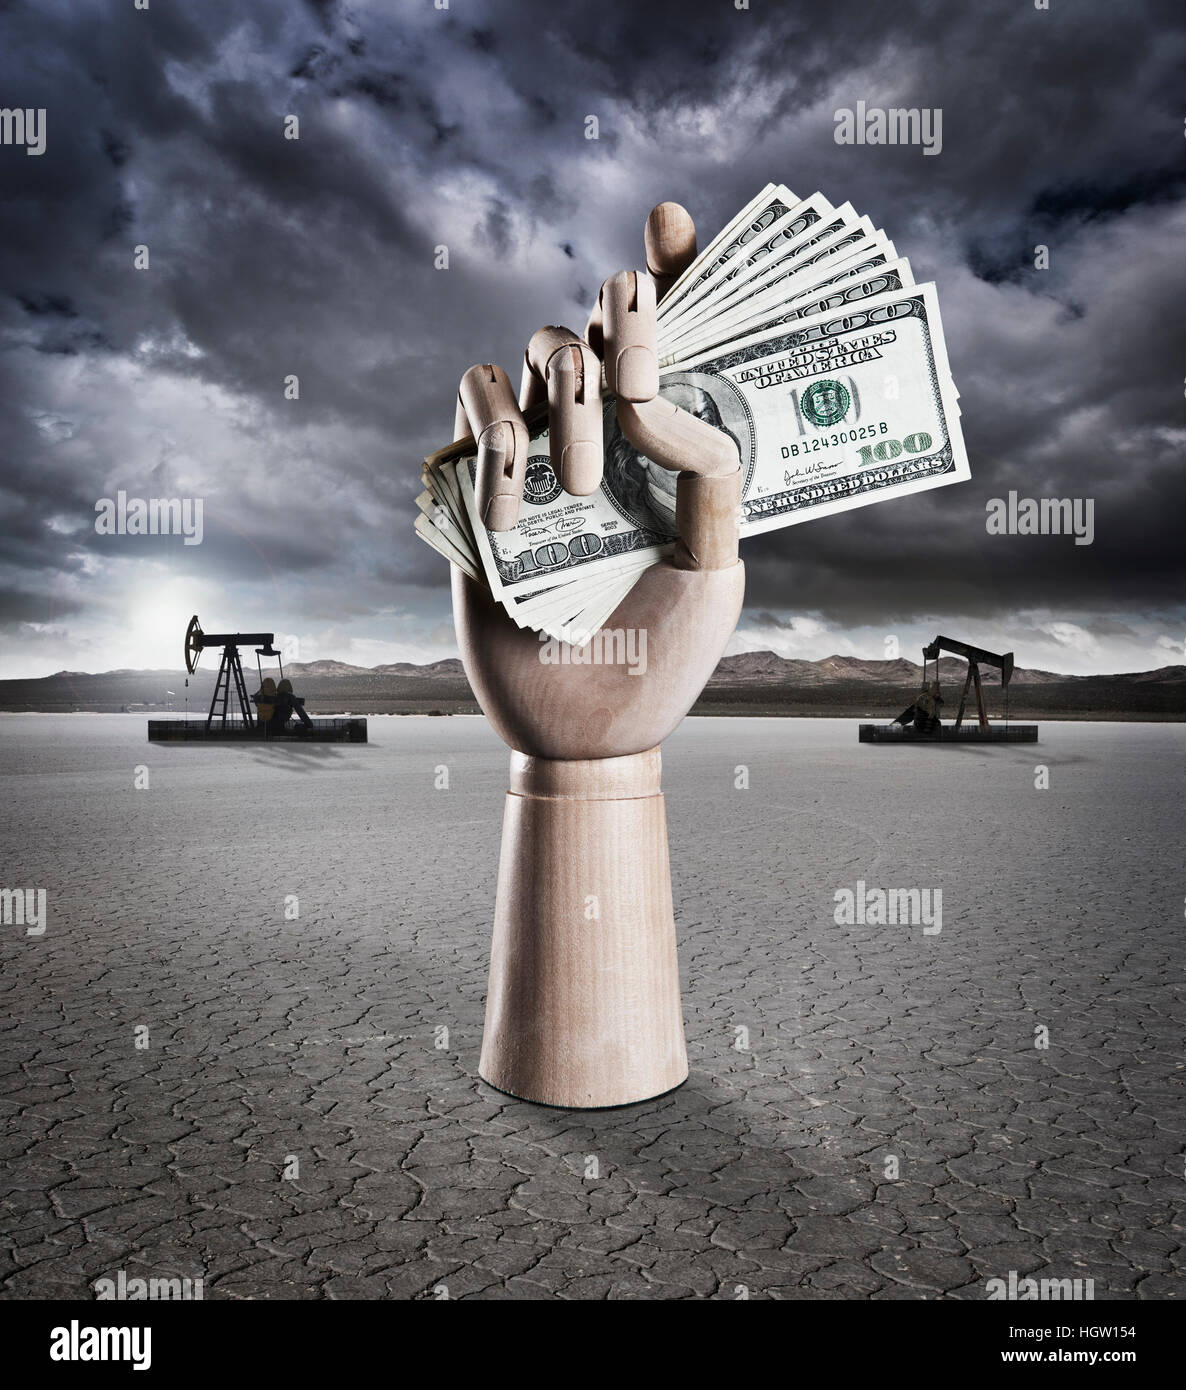 Manikin Hand Holding Money In Dry Lake Bed With Storm Clouds And Drilling Rigs In Background Stock Photo